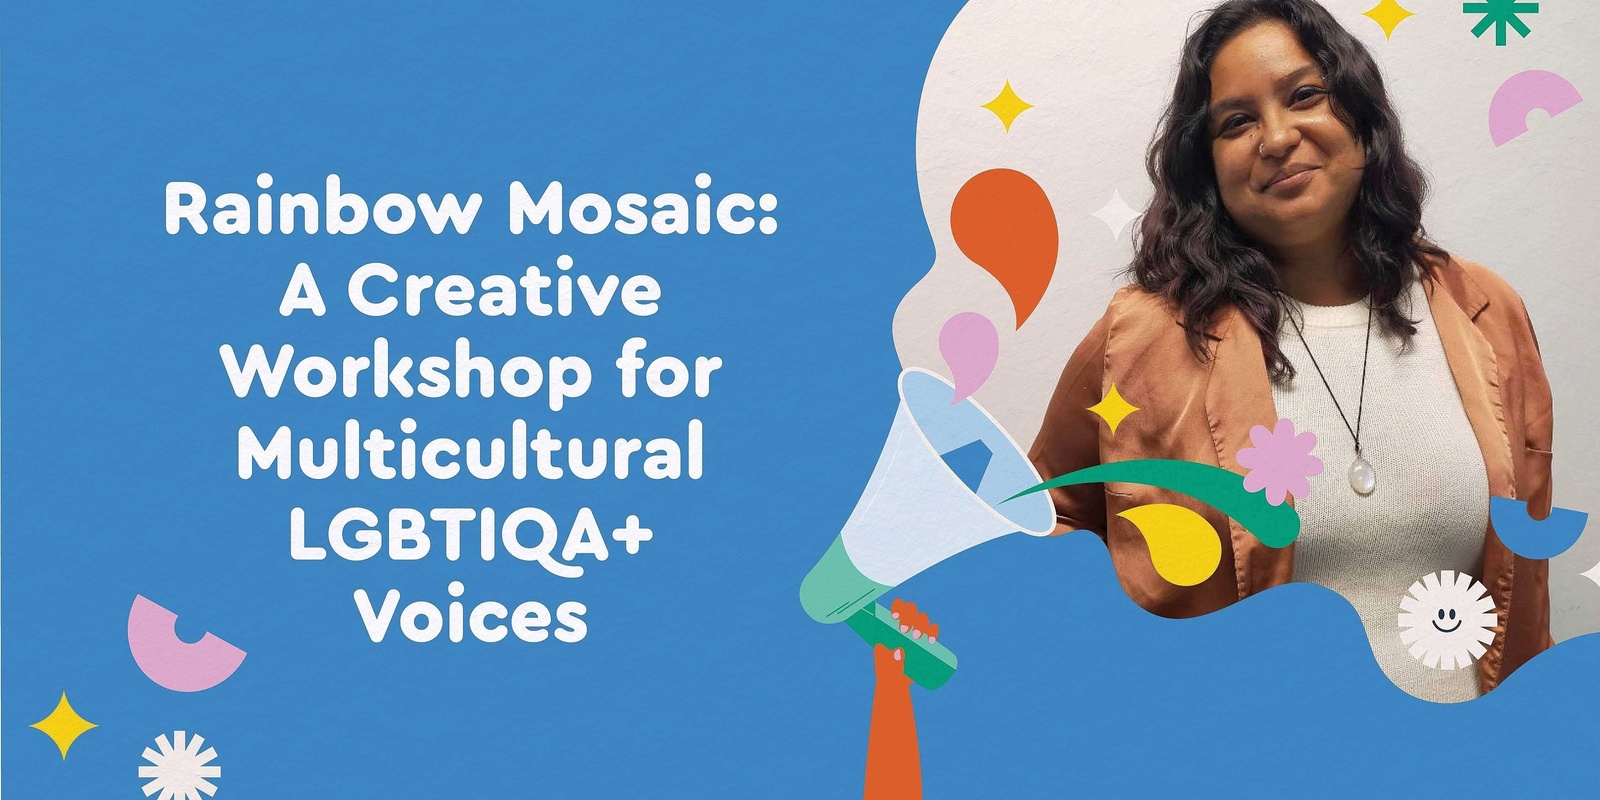 Banner image for Rainbow Mosaic: A Creative Workshop for Multicultural LGBTIQA+ Voices